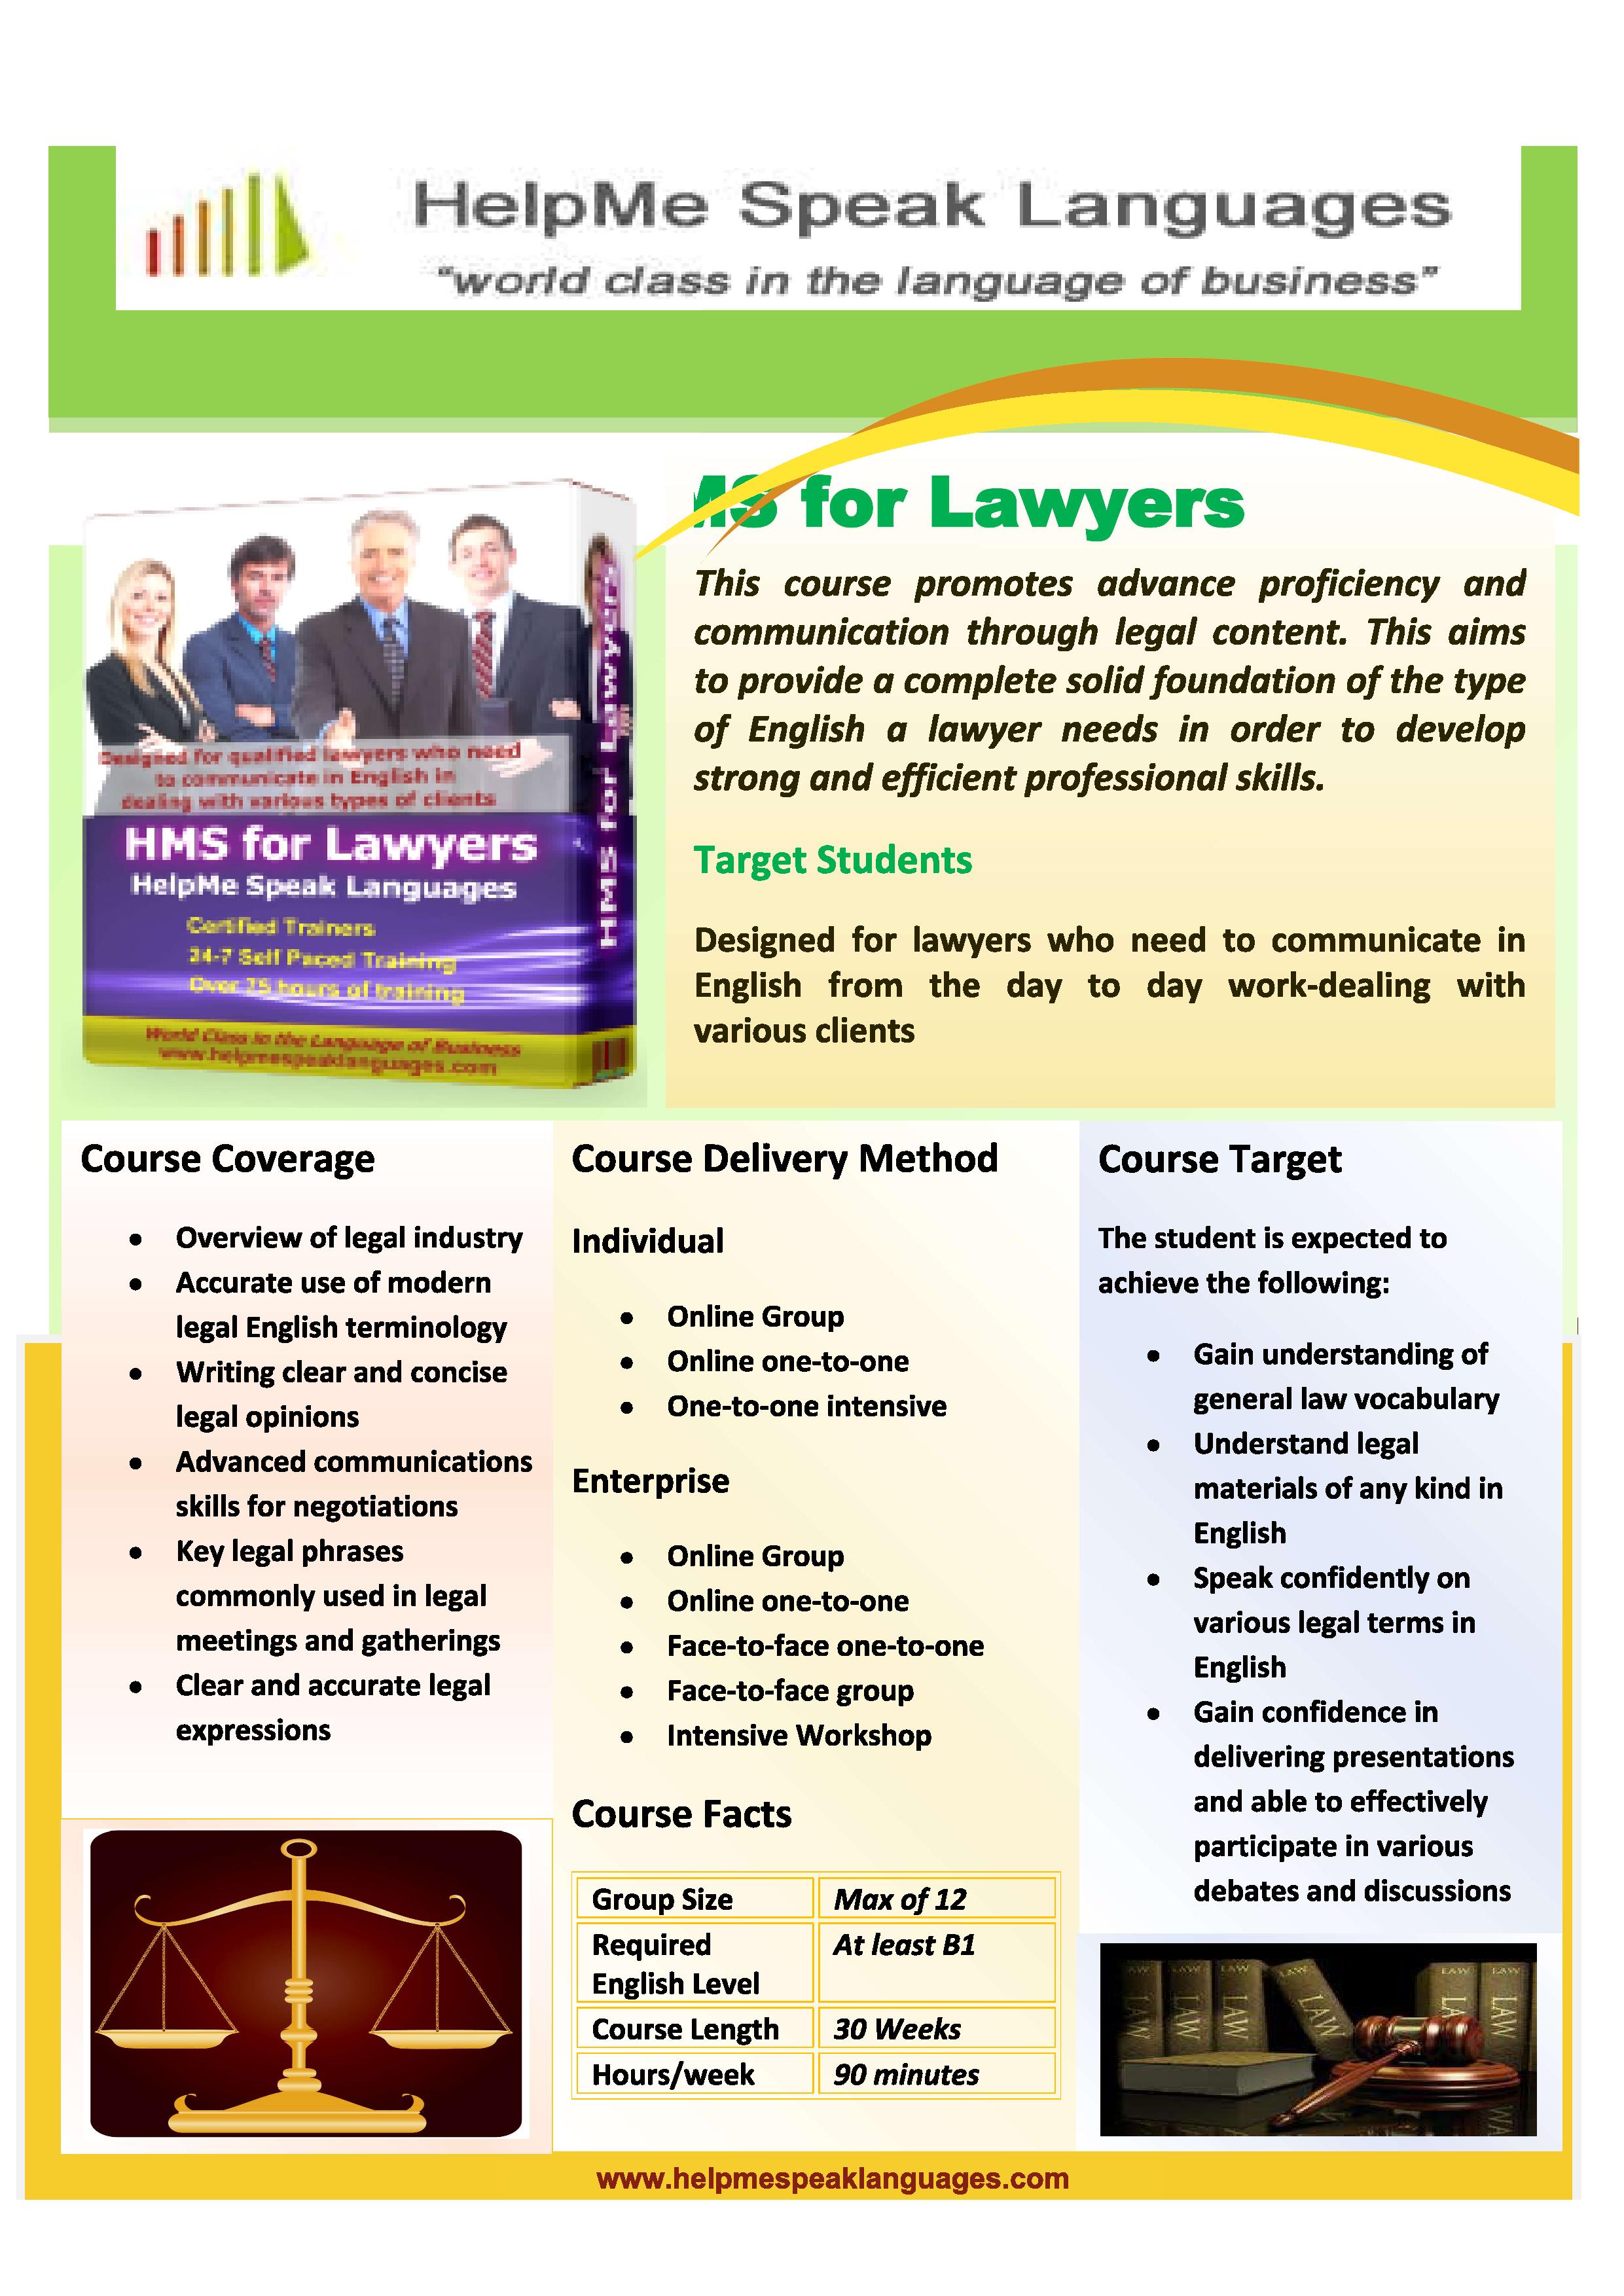 hms-for-lawyers-page-001